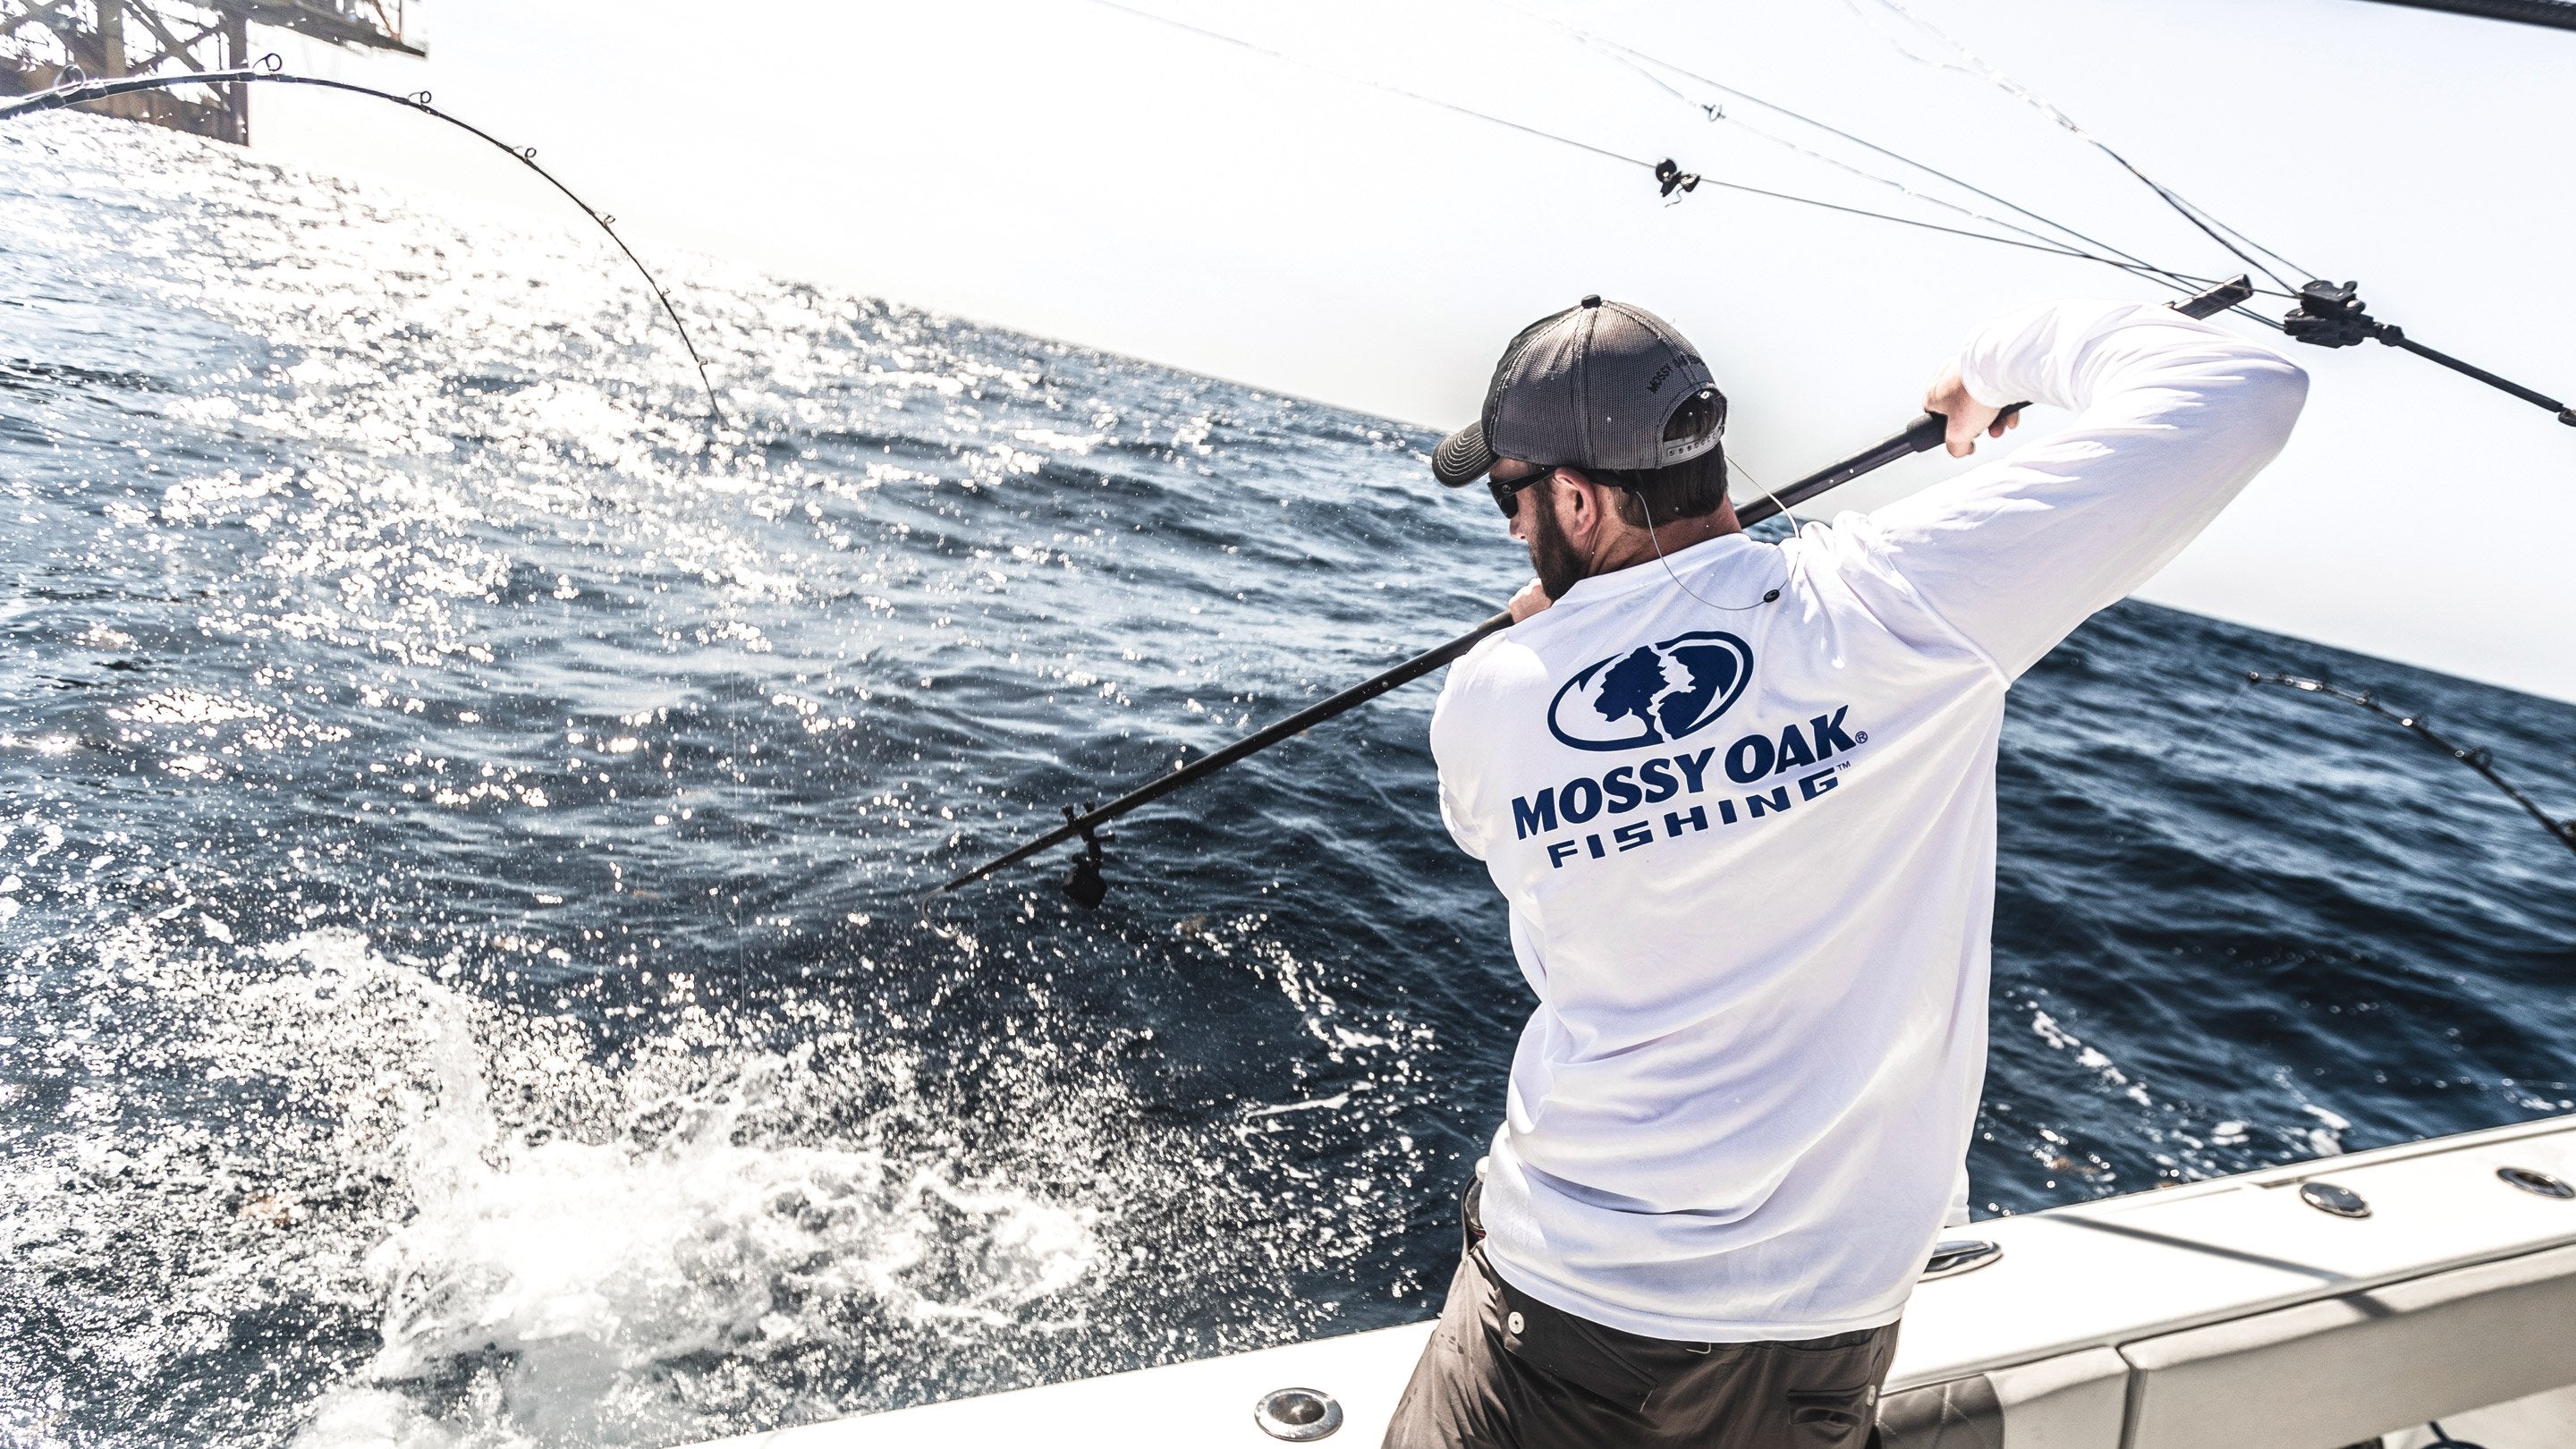 Performance Fishing Apparel & Shirts with UPF Sun Protection